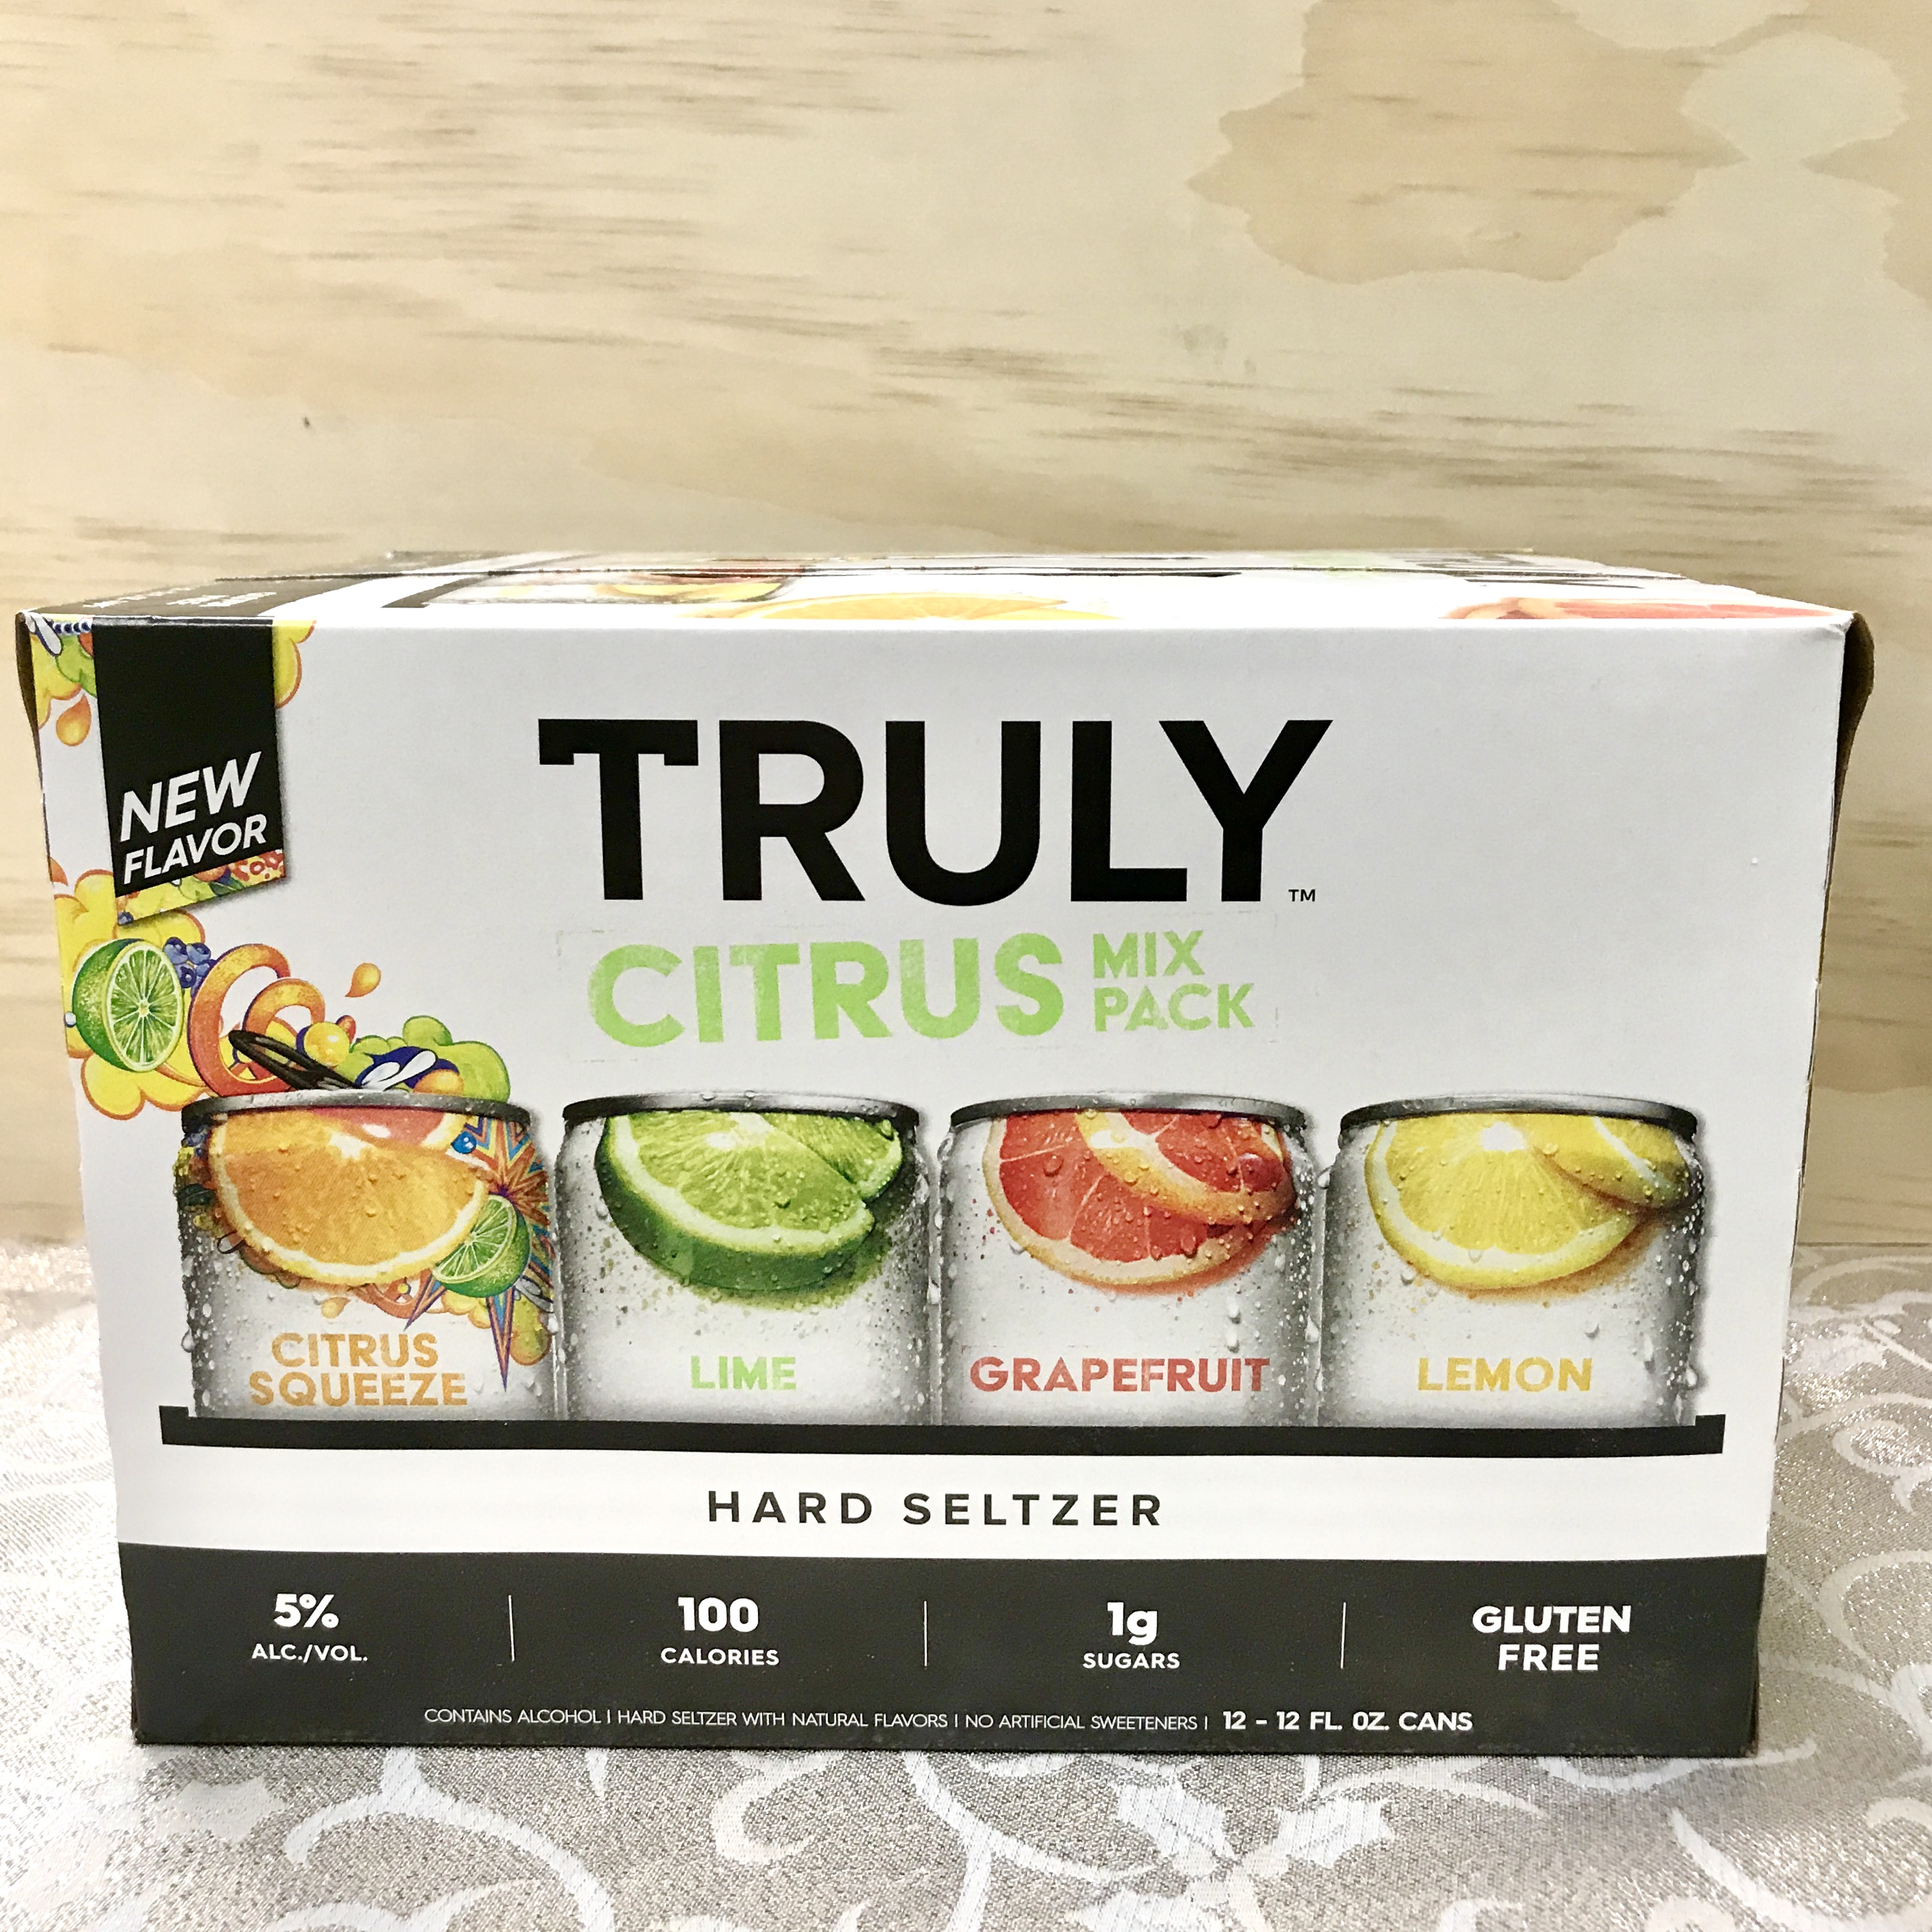 Truly Citrus Mix Pack hard seltzers 12 x 12oz cans